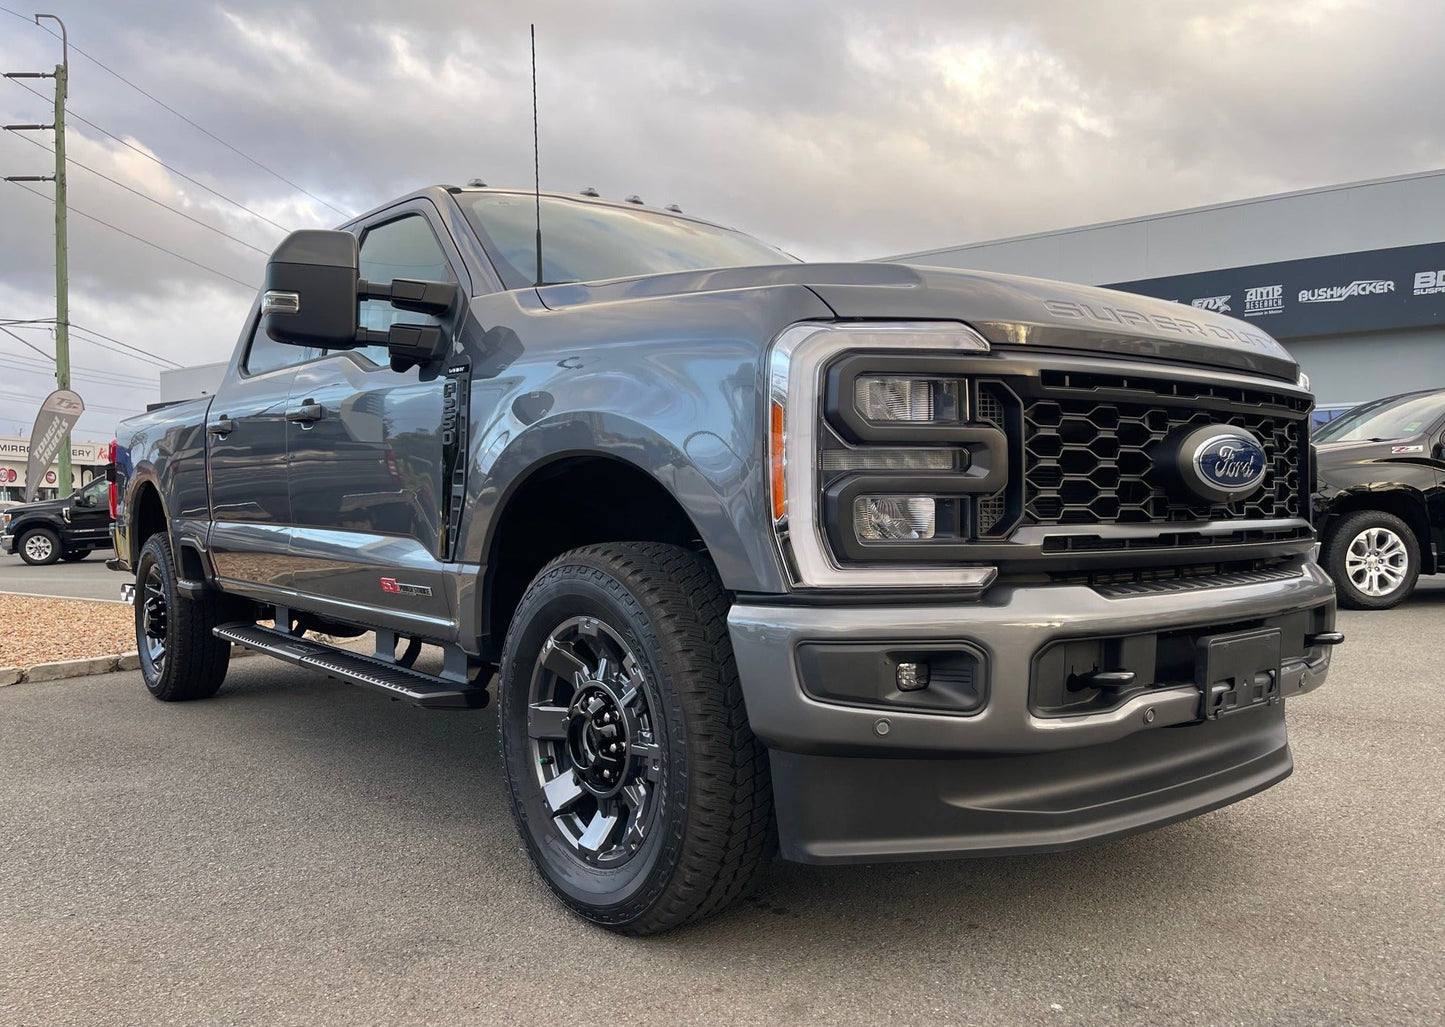 2023 Ford F250 Lariat 6 Seater in Carbonized Grey (STOCK# TT 6389)